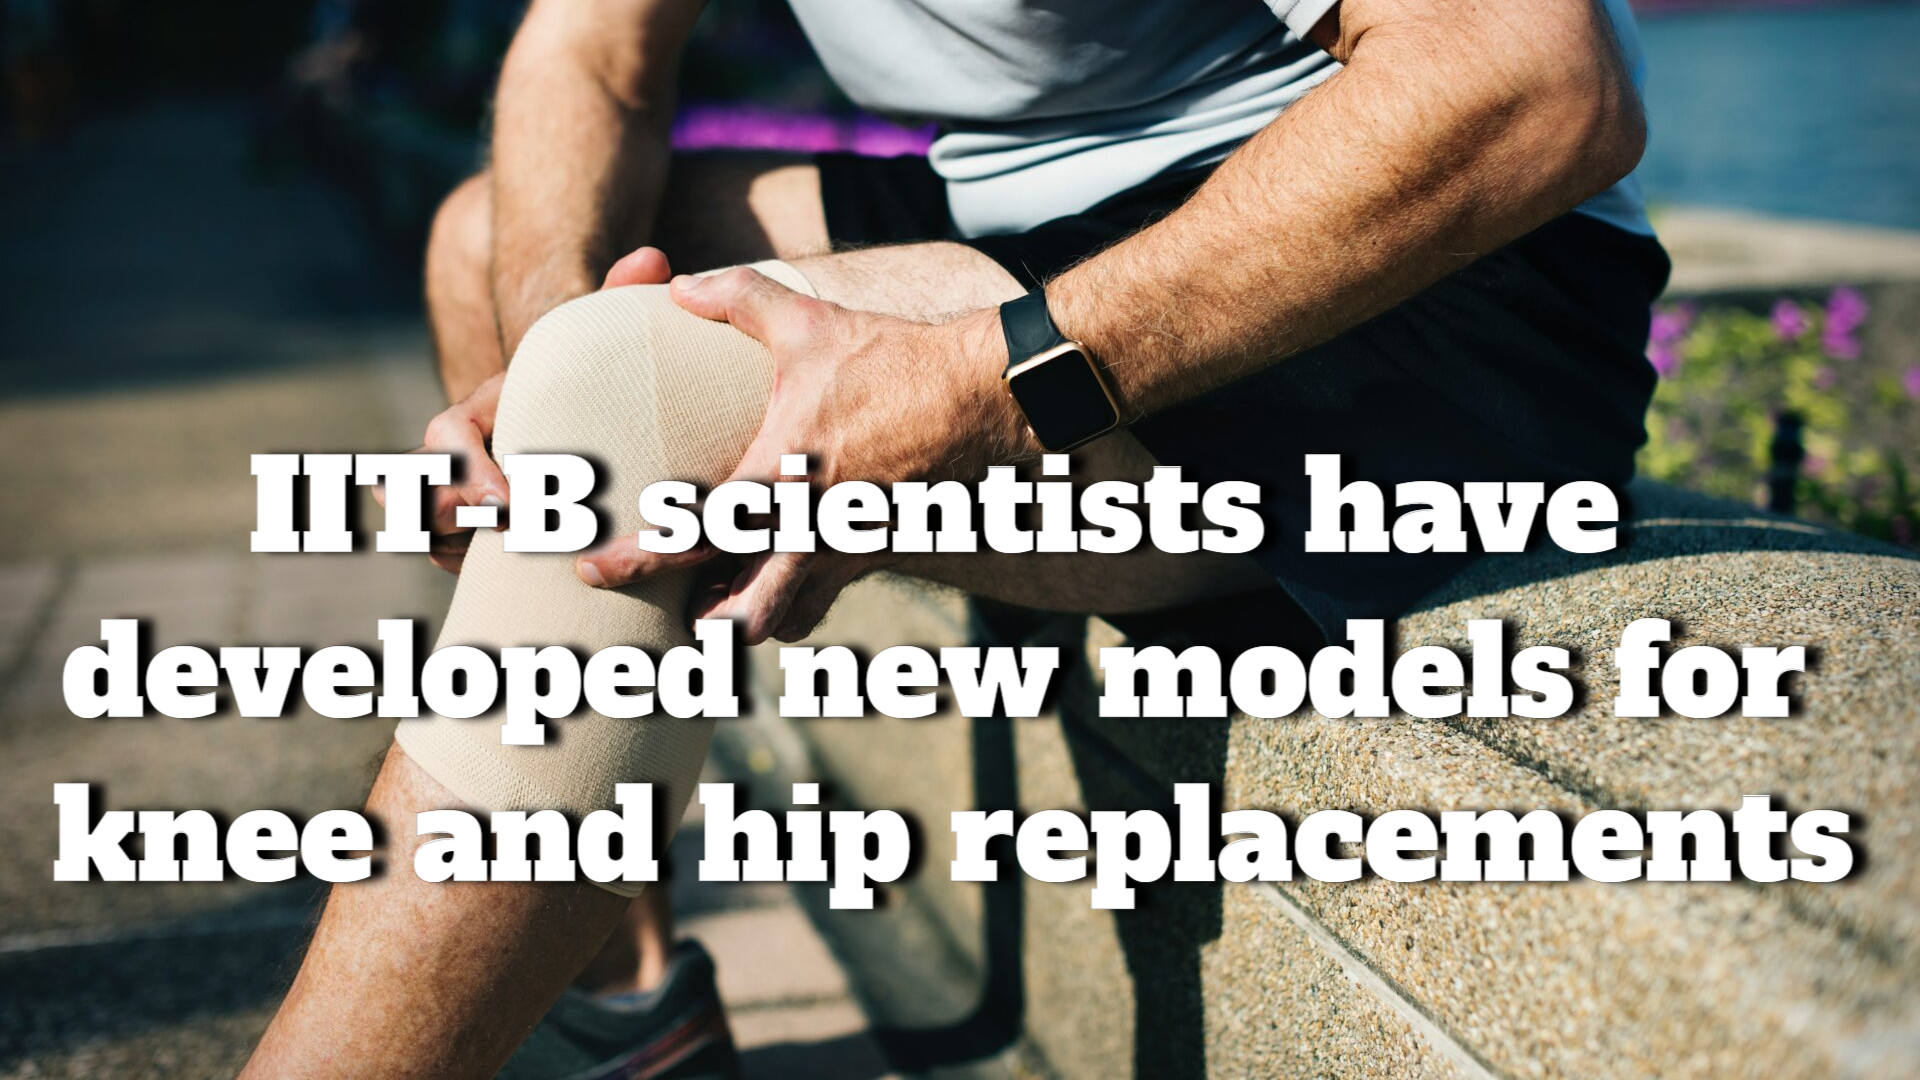 Researchers at IIT-B have developed models for better hip and knee replacements